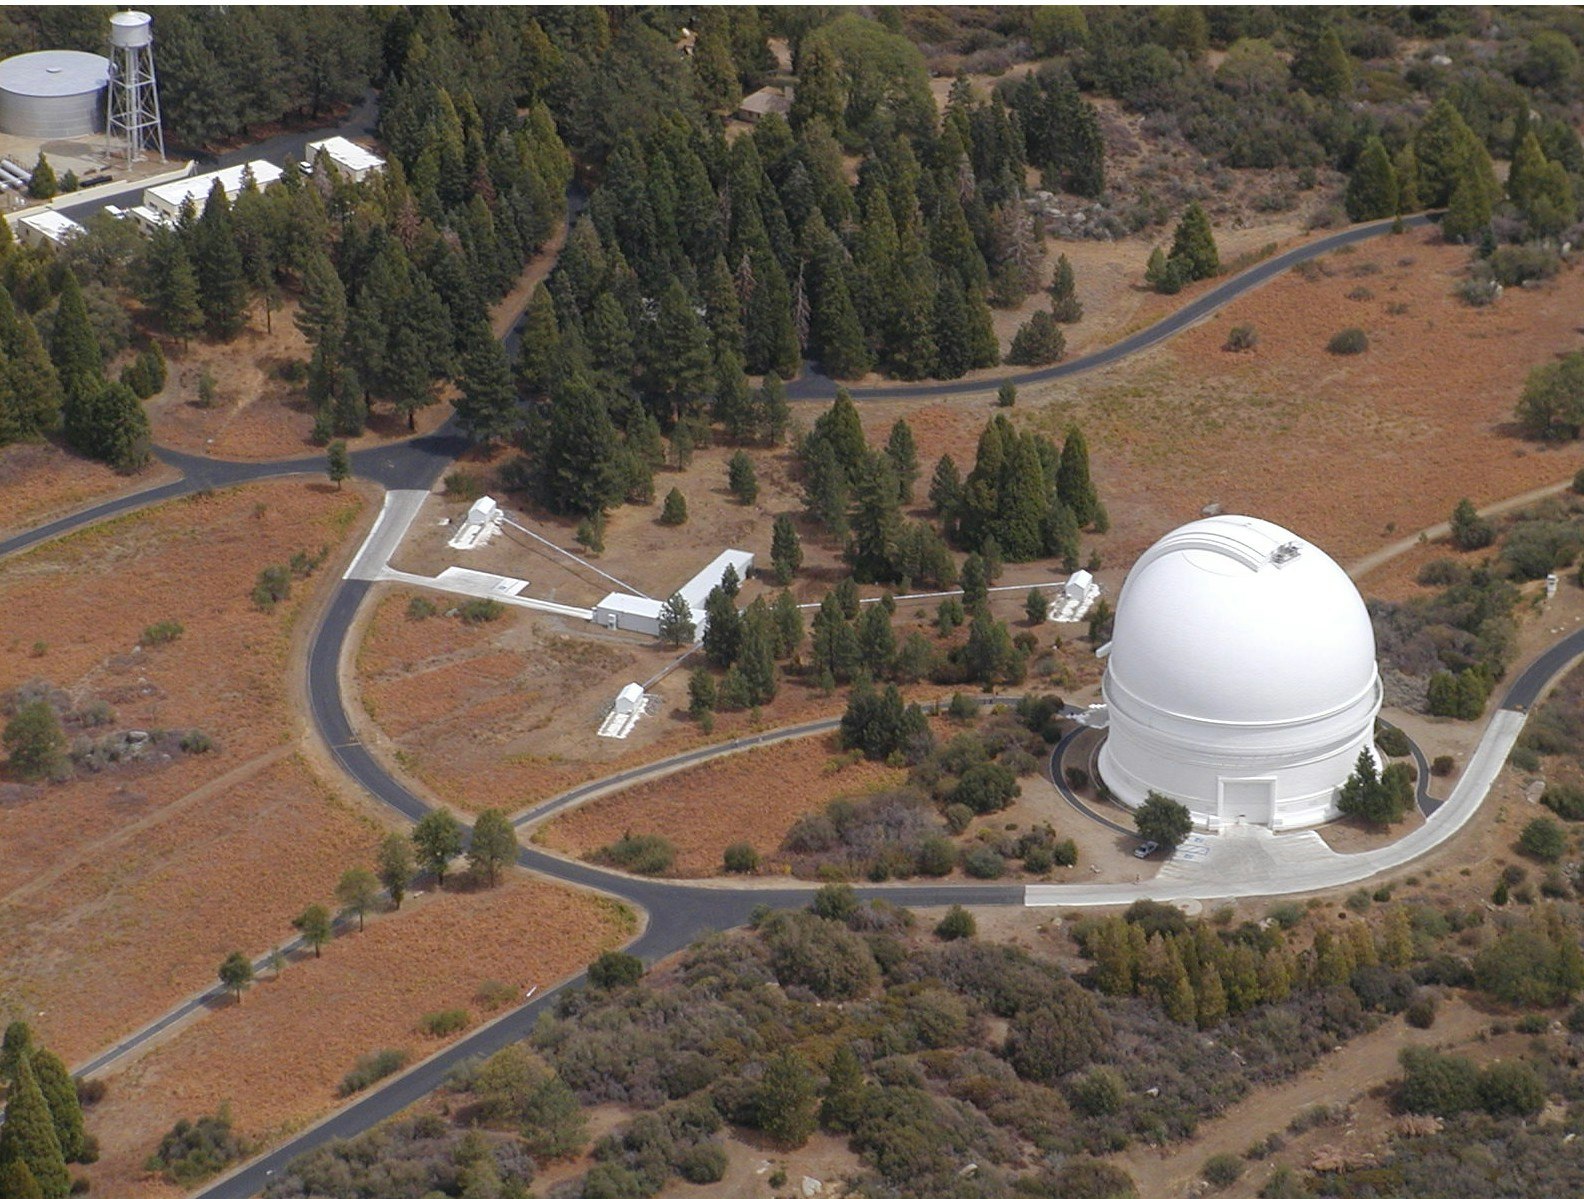 Aerial view of the Palomar Observatory and grounds